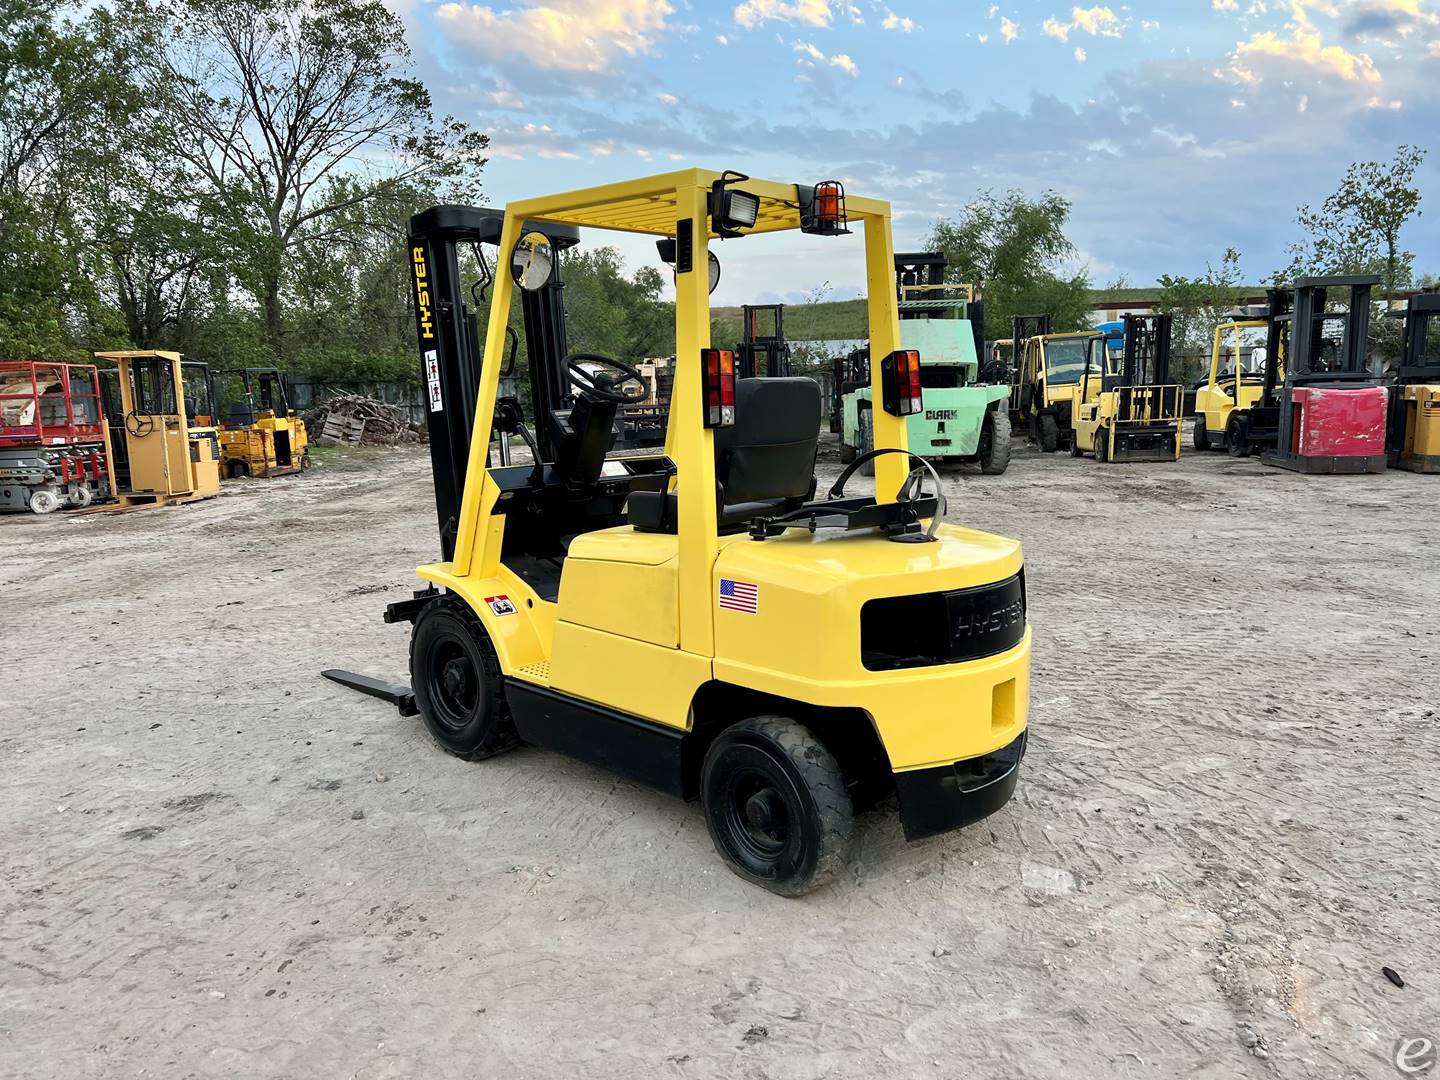 1998 Hyster H50xm